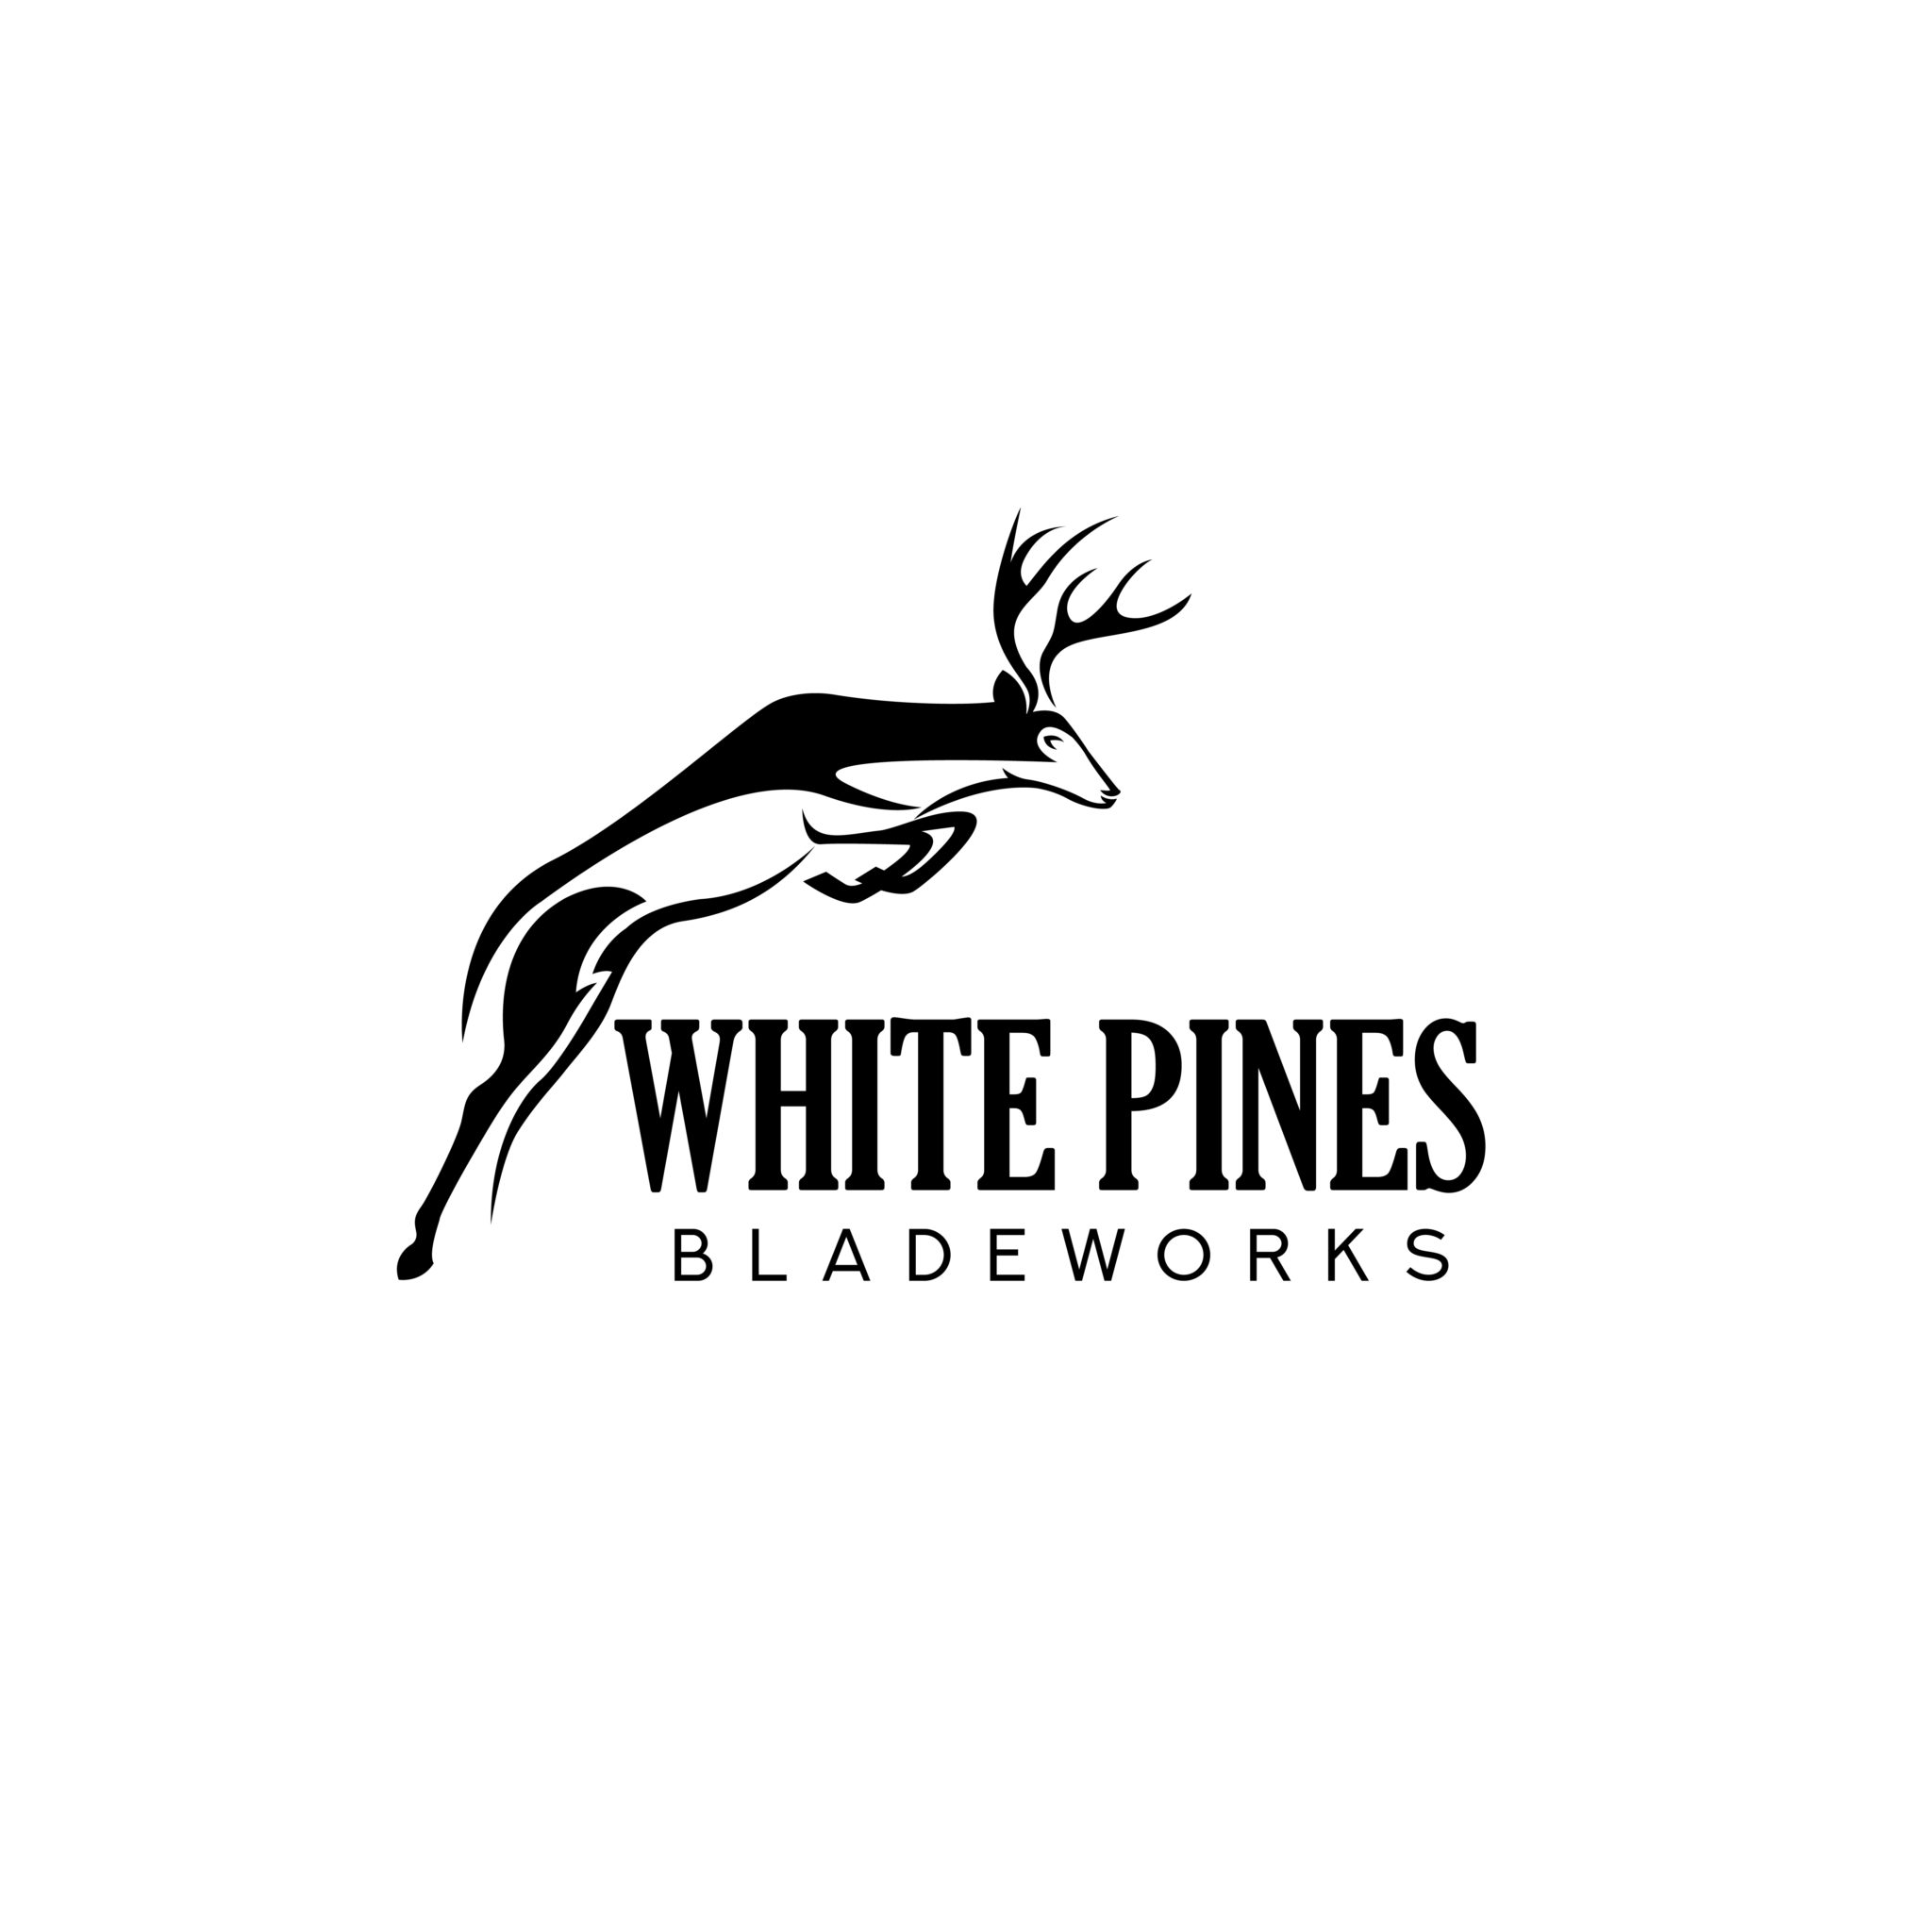 ABSTRACT Logo Designs for White pines